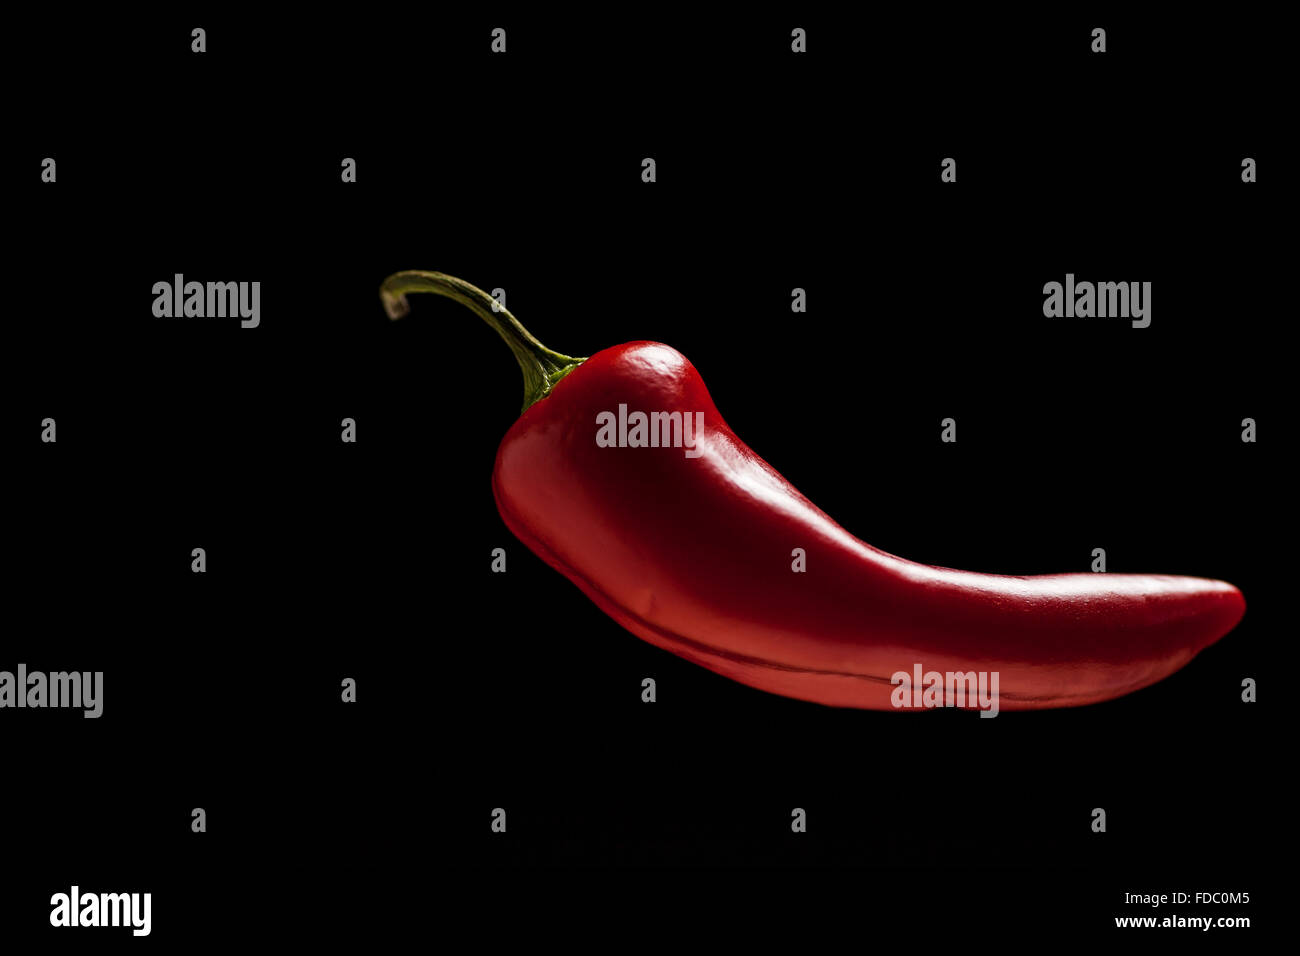 Spicy red chili isolated on a dark background with plenty of copy space Stock Photo